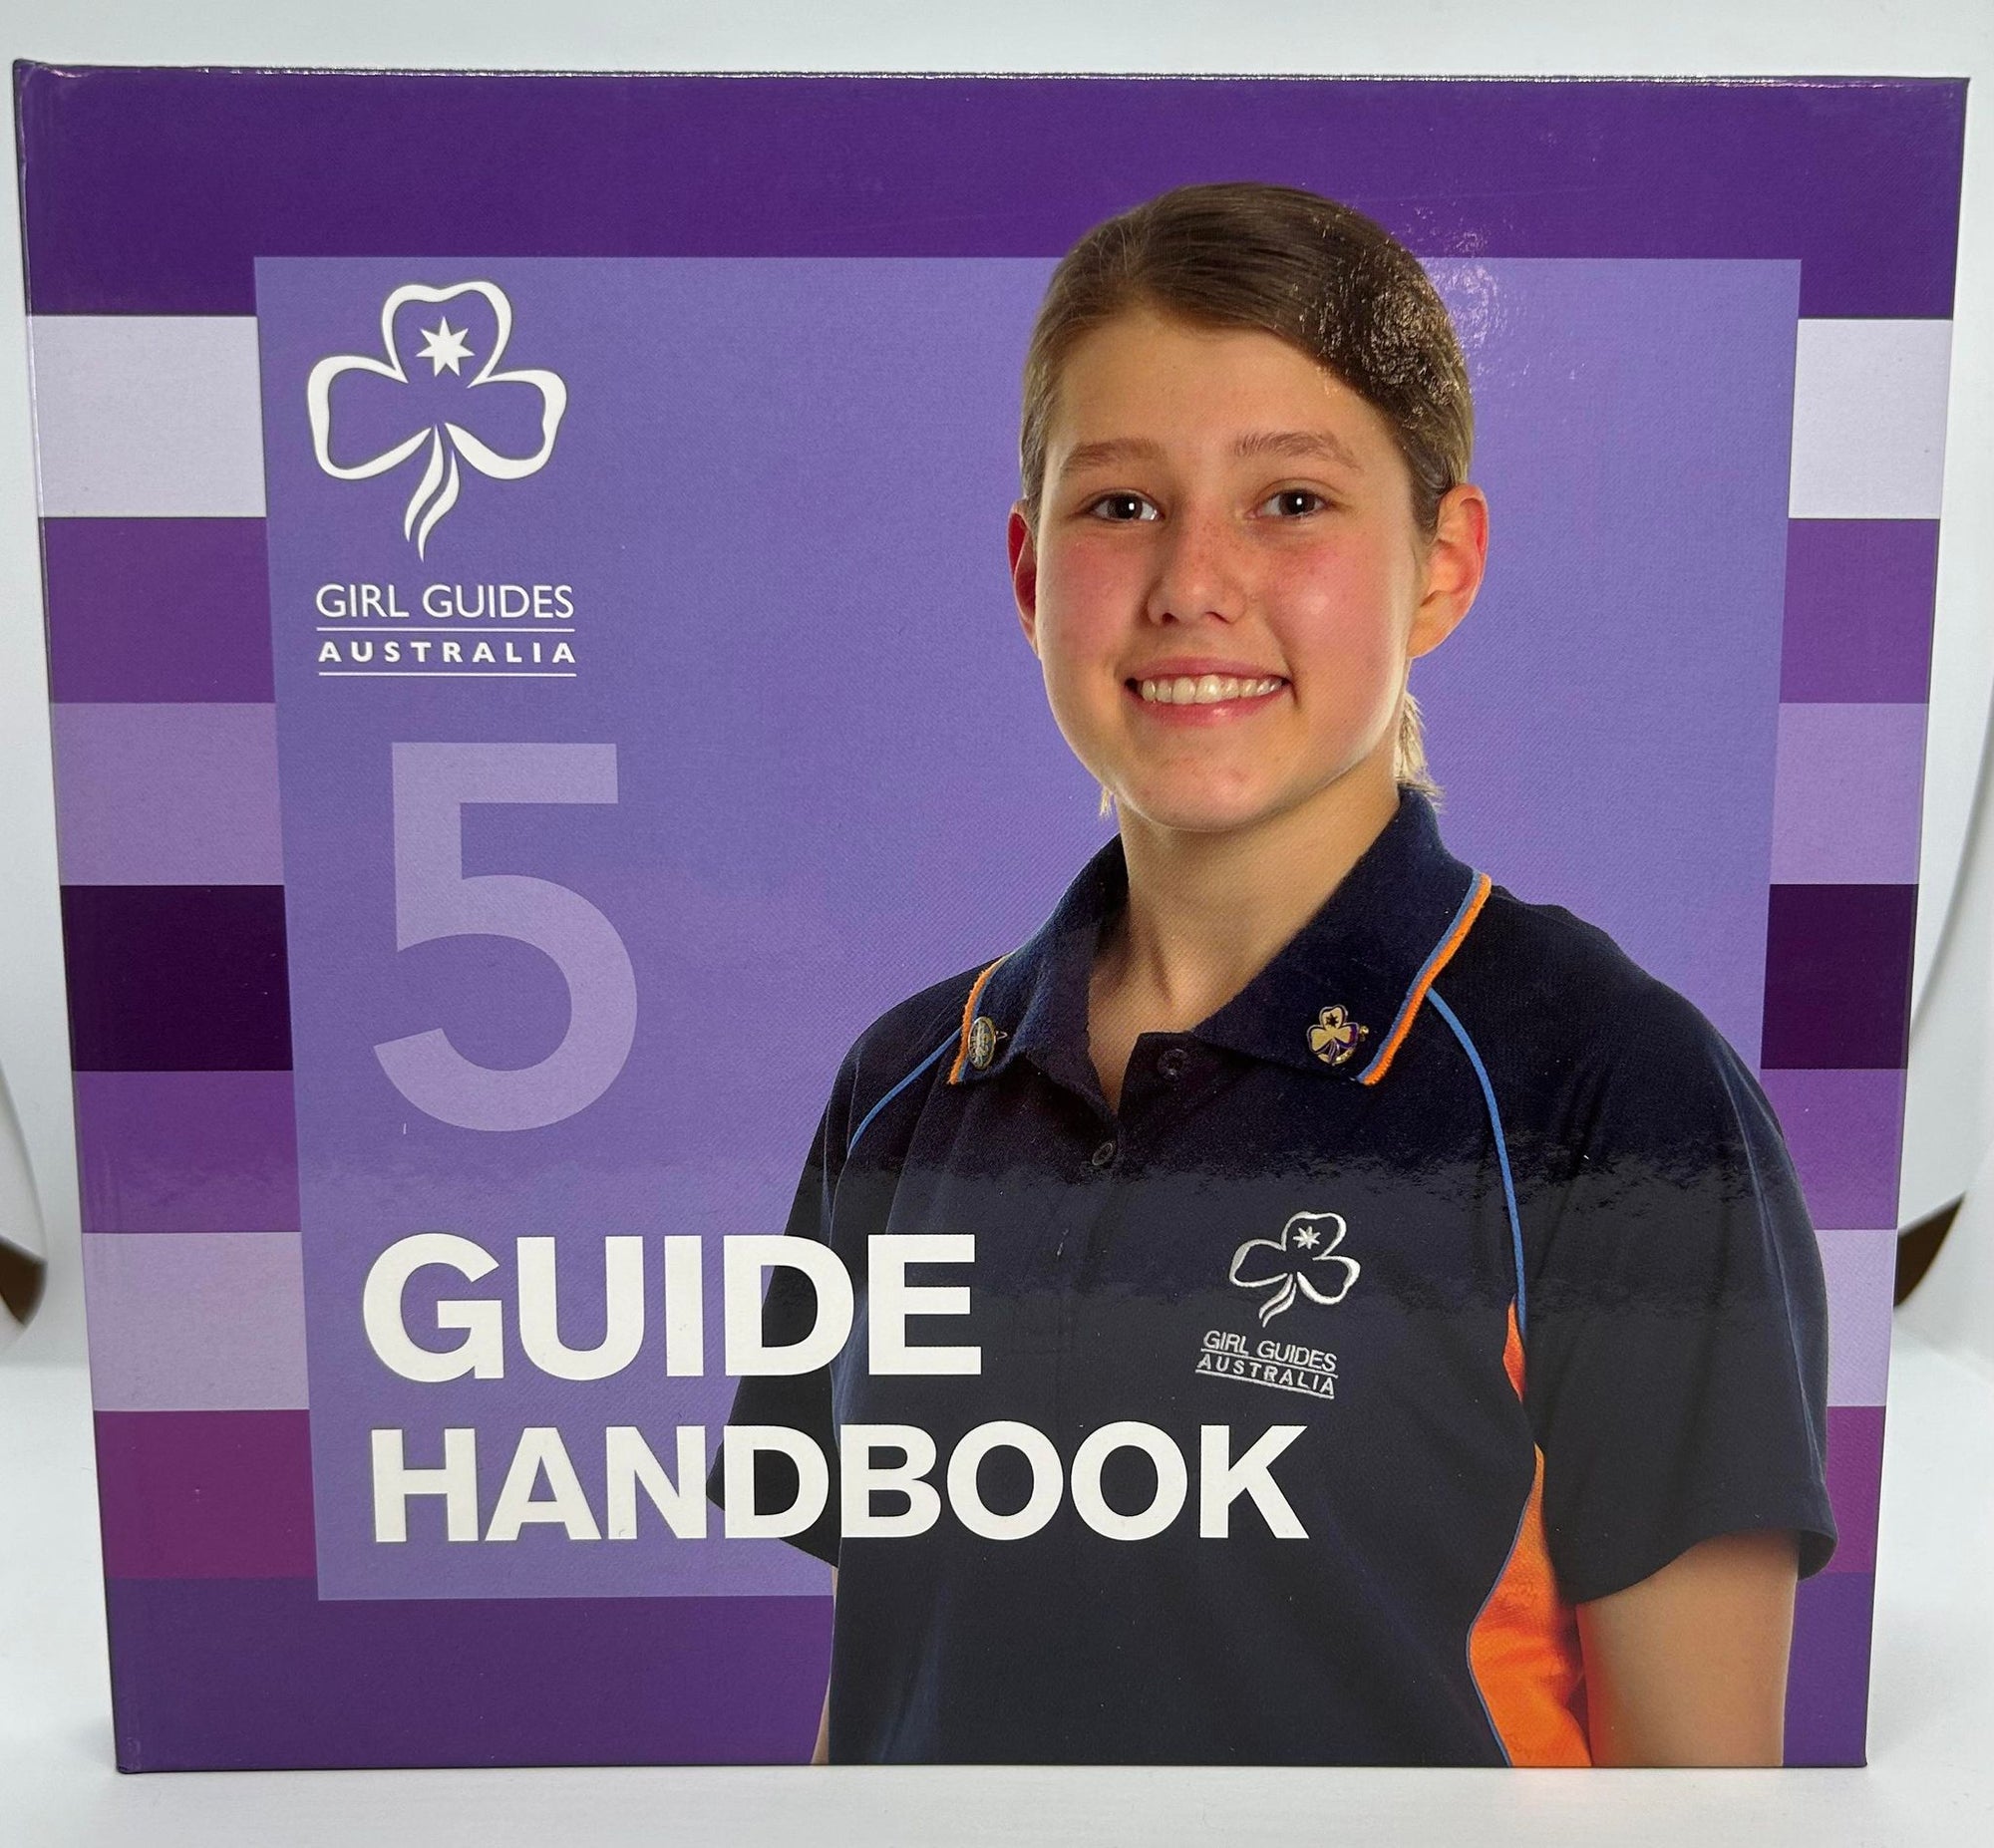 the purple number 5 handbook for senior guides that has a hard cover